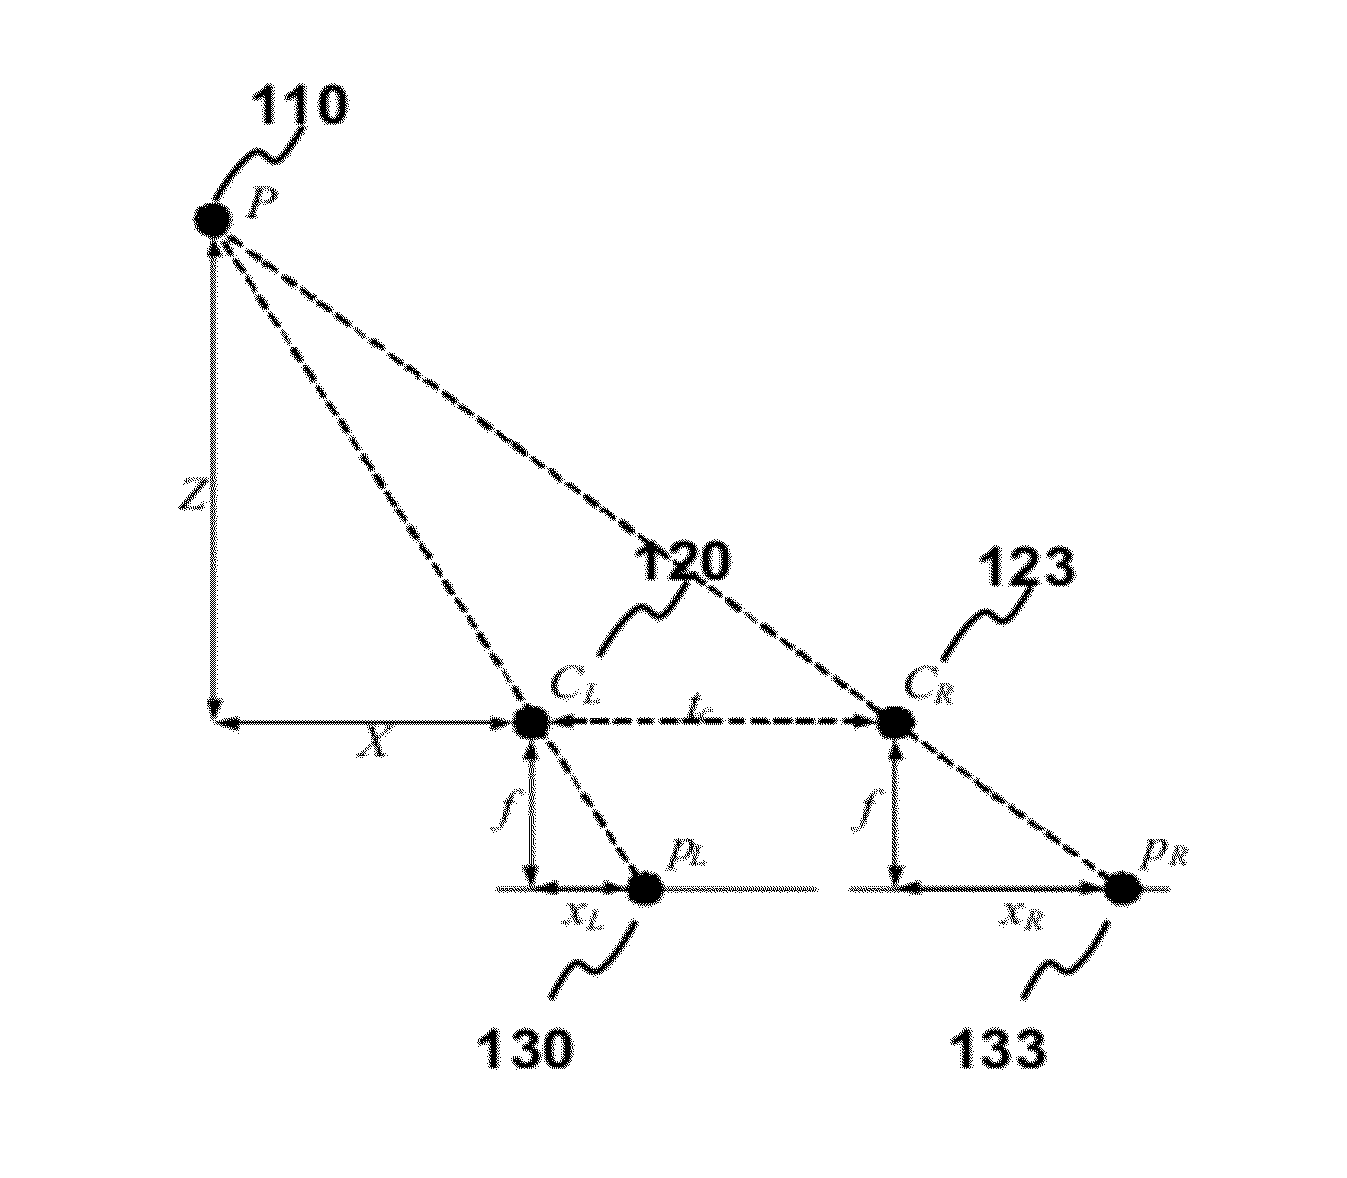 Method and Apparatus for Multiview Video Coding